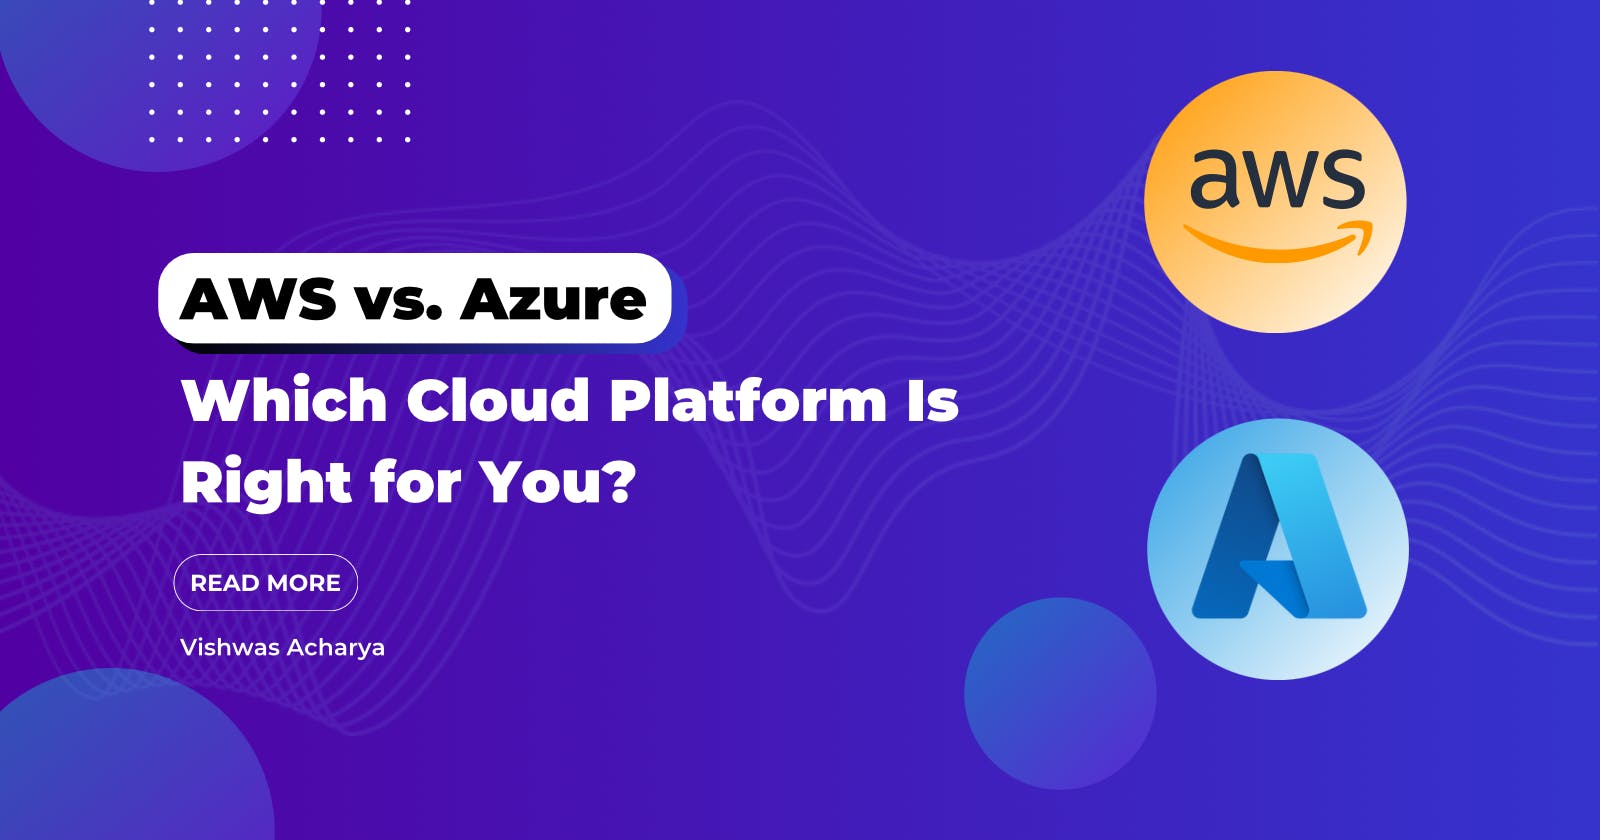 AWS vs. Azure: Which Cloud Platform Is Right for You?